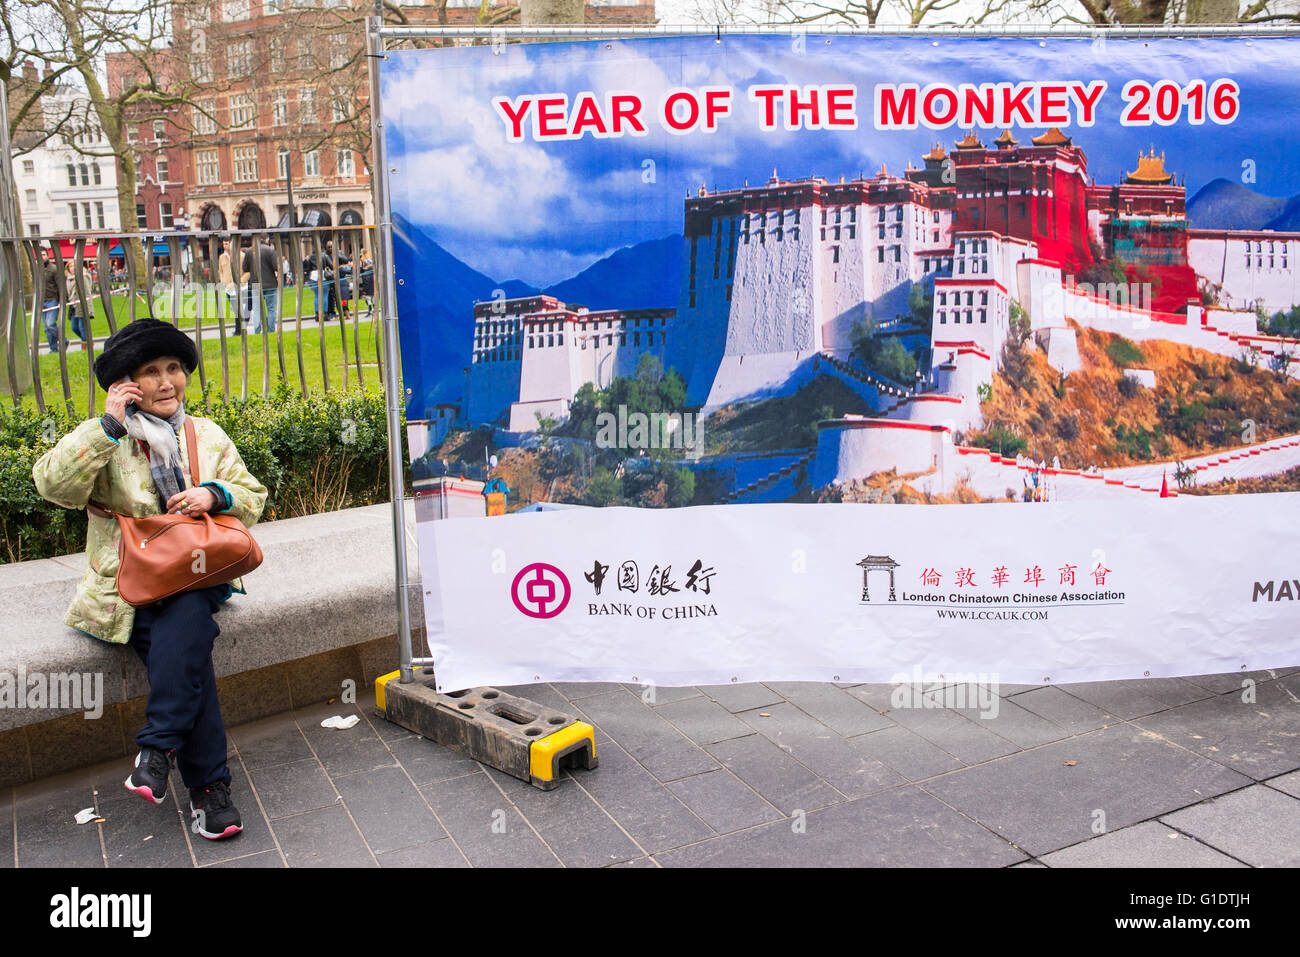 Big billboard celebrating Chinese New Year 2016, 'Year of the Monkey' with old Chinese woman on the phone sitting next to it. Stock Photo